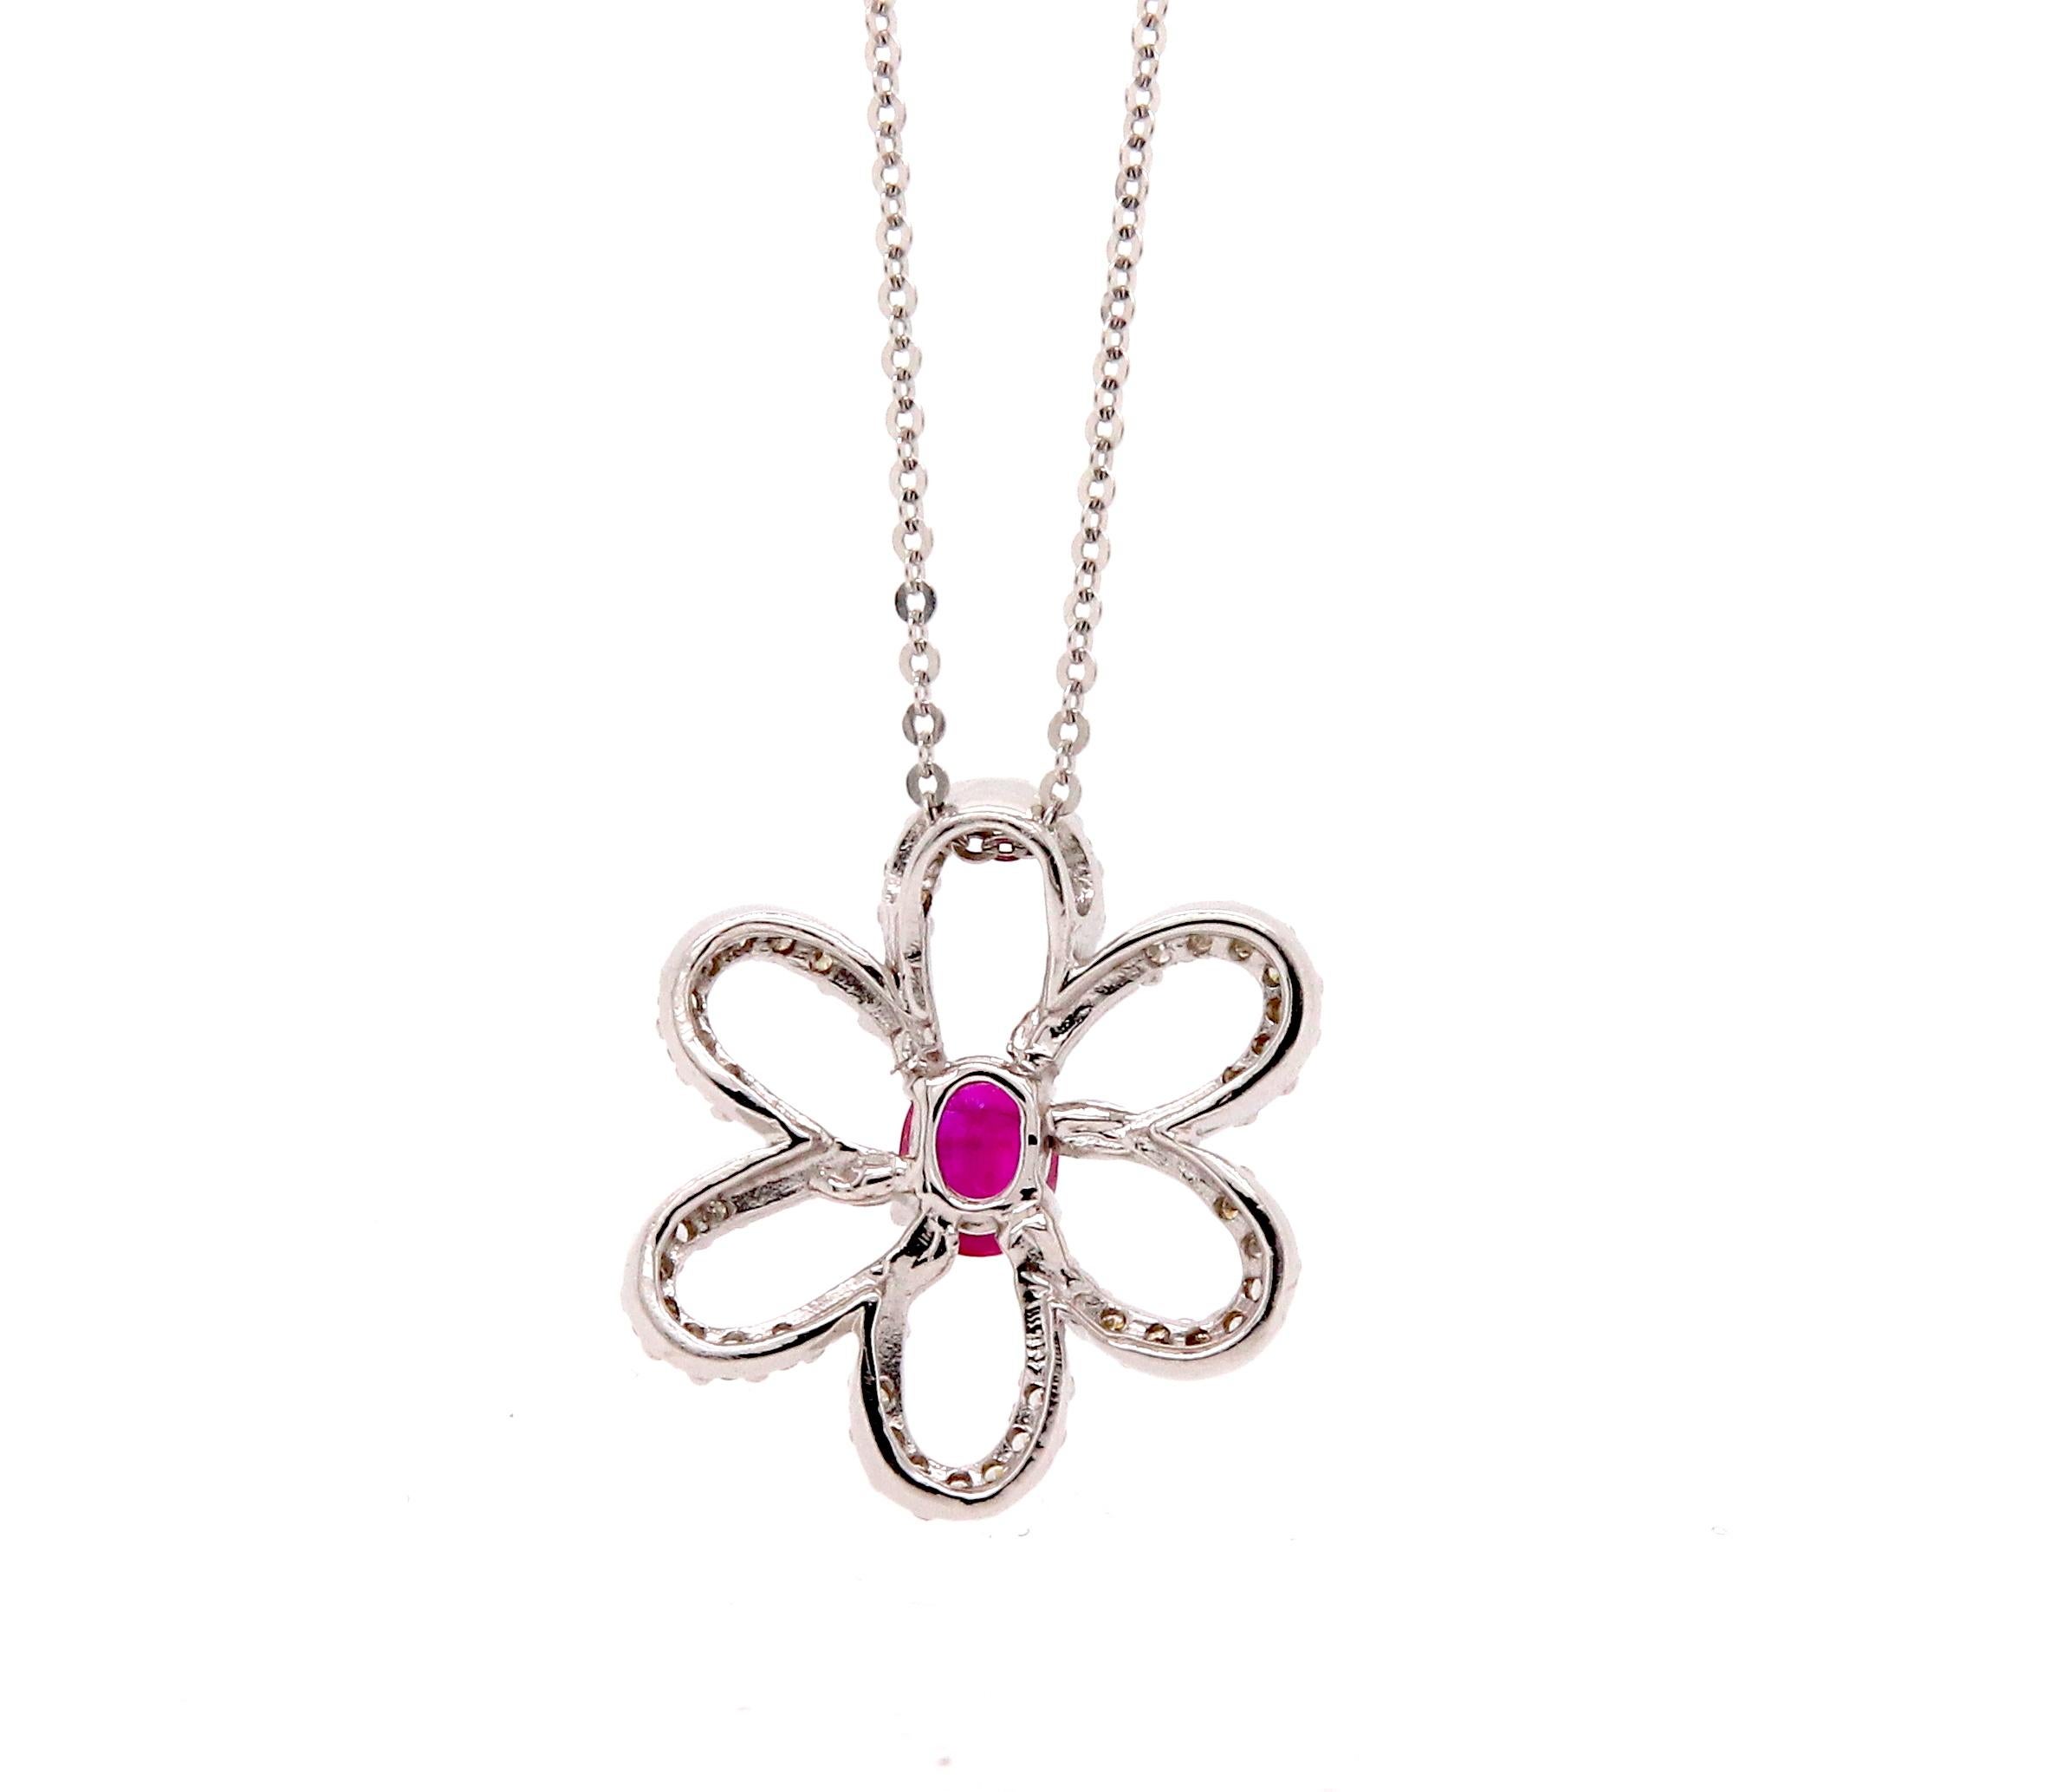 A beautiful and dainty piece, this Flower shaped pendant is made of 14K White Gold adorned with brilliant White Diamonds. Featuring a 0.52 Carat Ruby, this piece lights up any look! 

Material: 14k White Gold 
Main Stone Details: 1 Oval Shaped Ruby